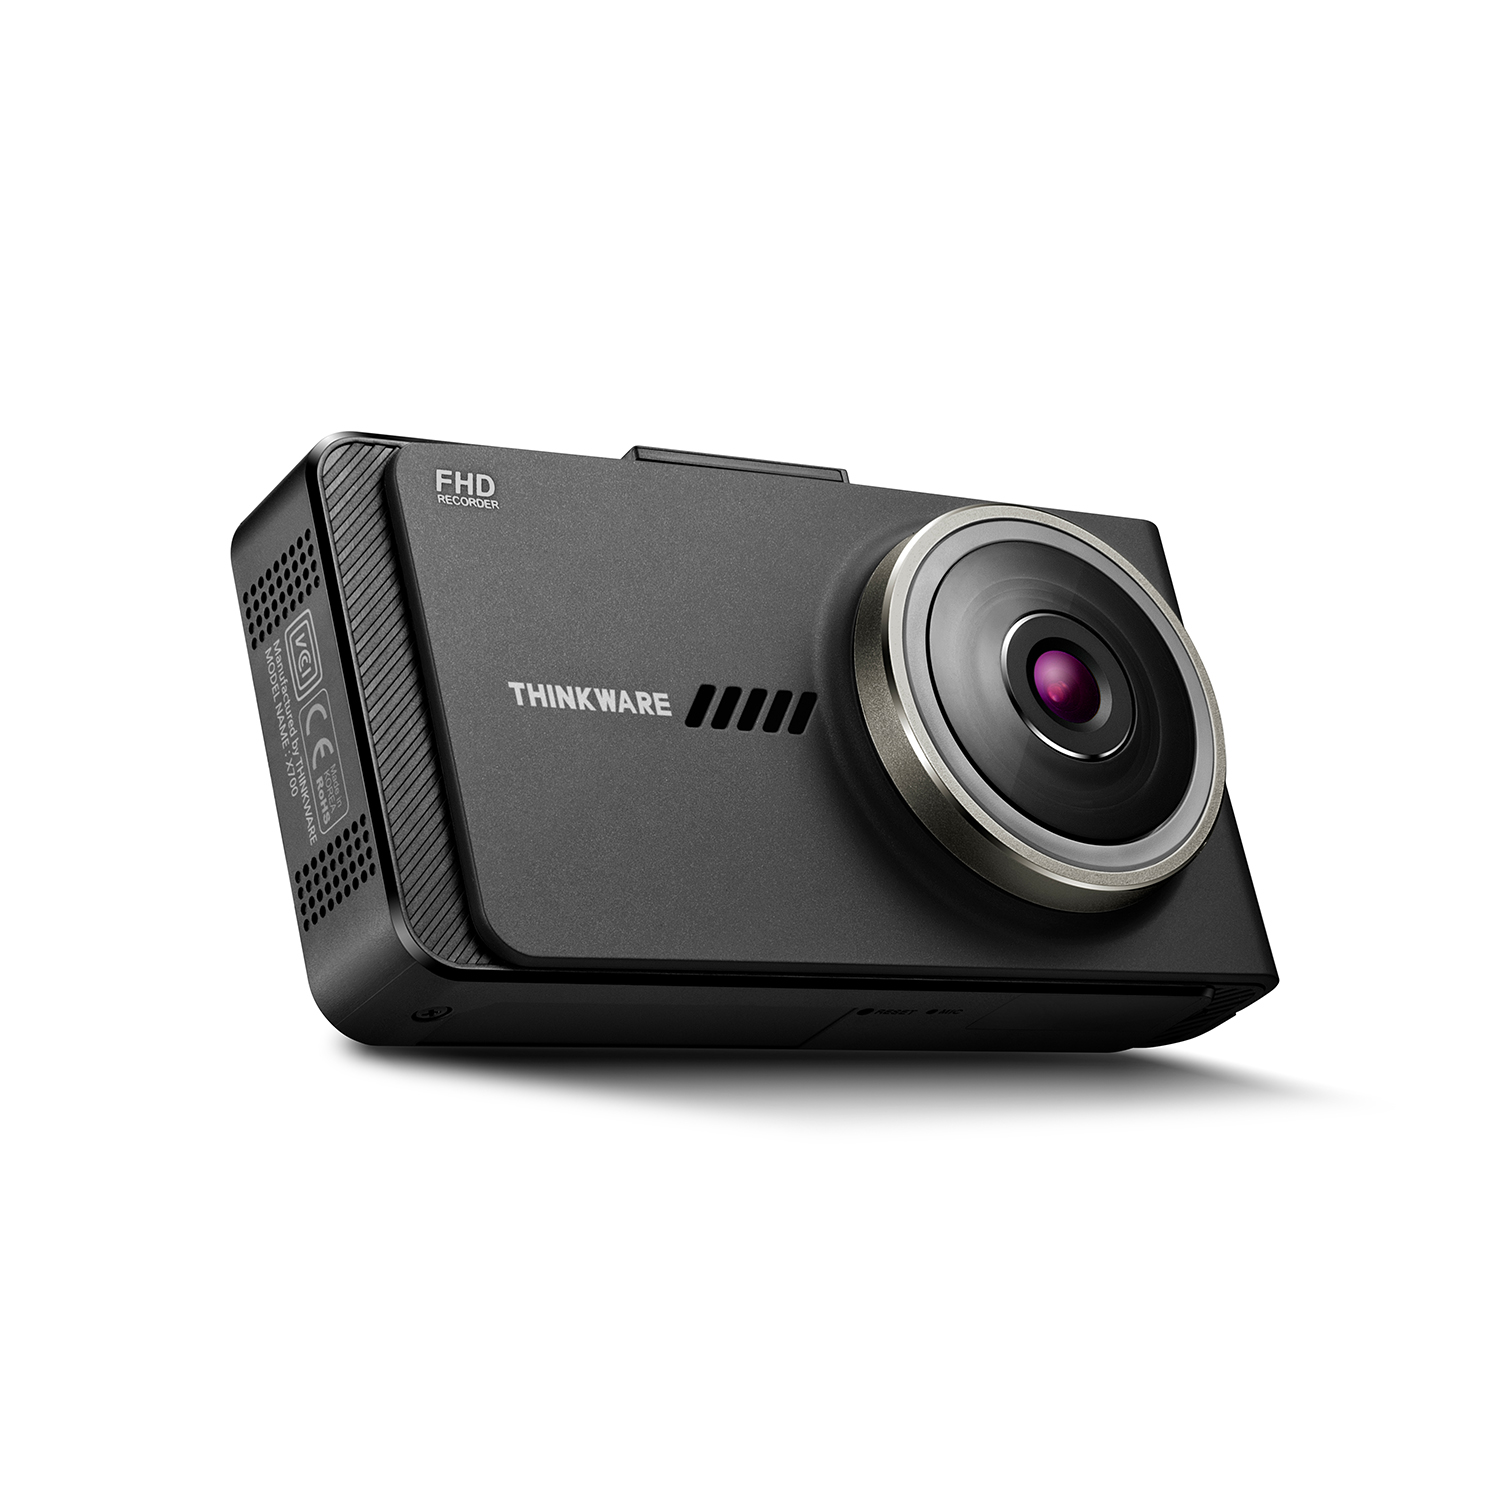 THINKWARE X700 Dual Dash Cam Front and Rear Camera for Cars, 1080P FHD, Dashboard Camera Recorder with G-Sensor, Car Camera W/Sony Sensor, GPS, Night Vision, 16GB, Optional Parking Mode - image 3 of 7